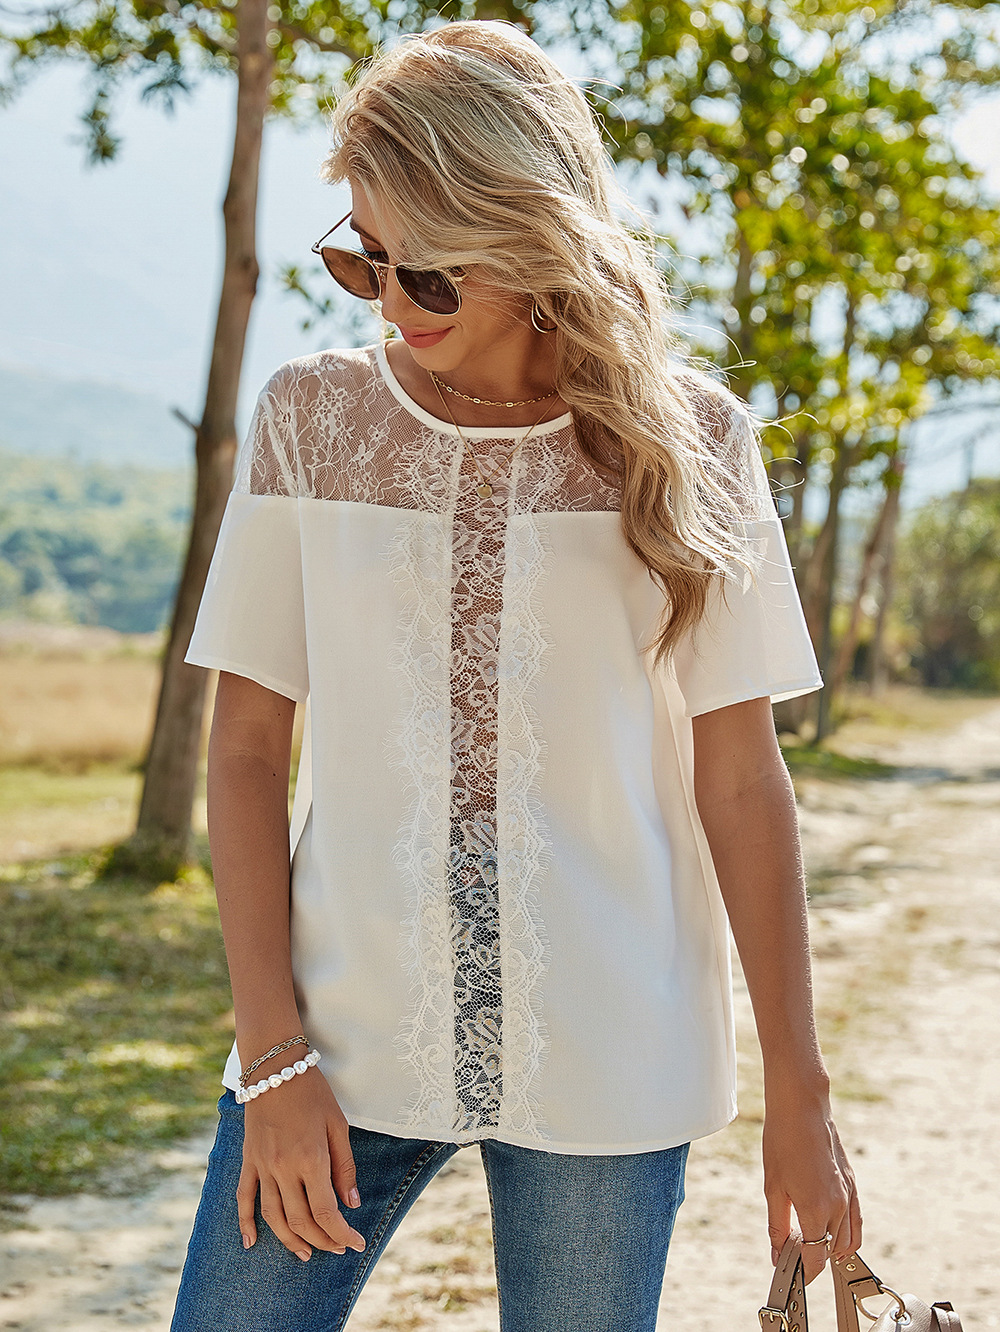 Casual splice T-shirt European style lace tops for women